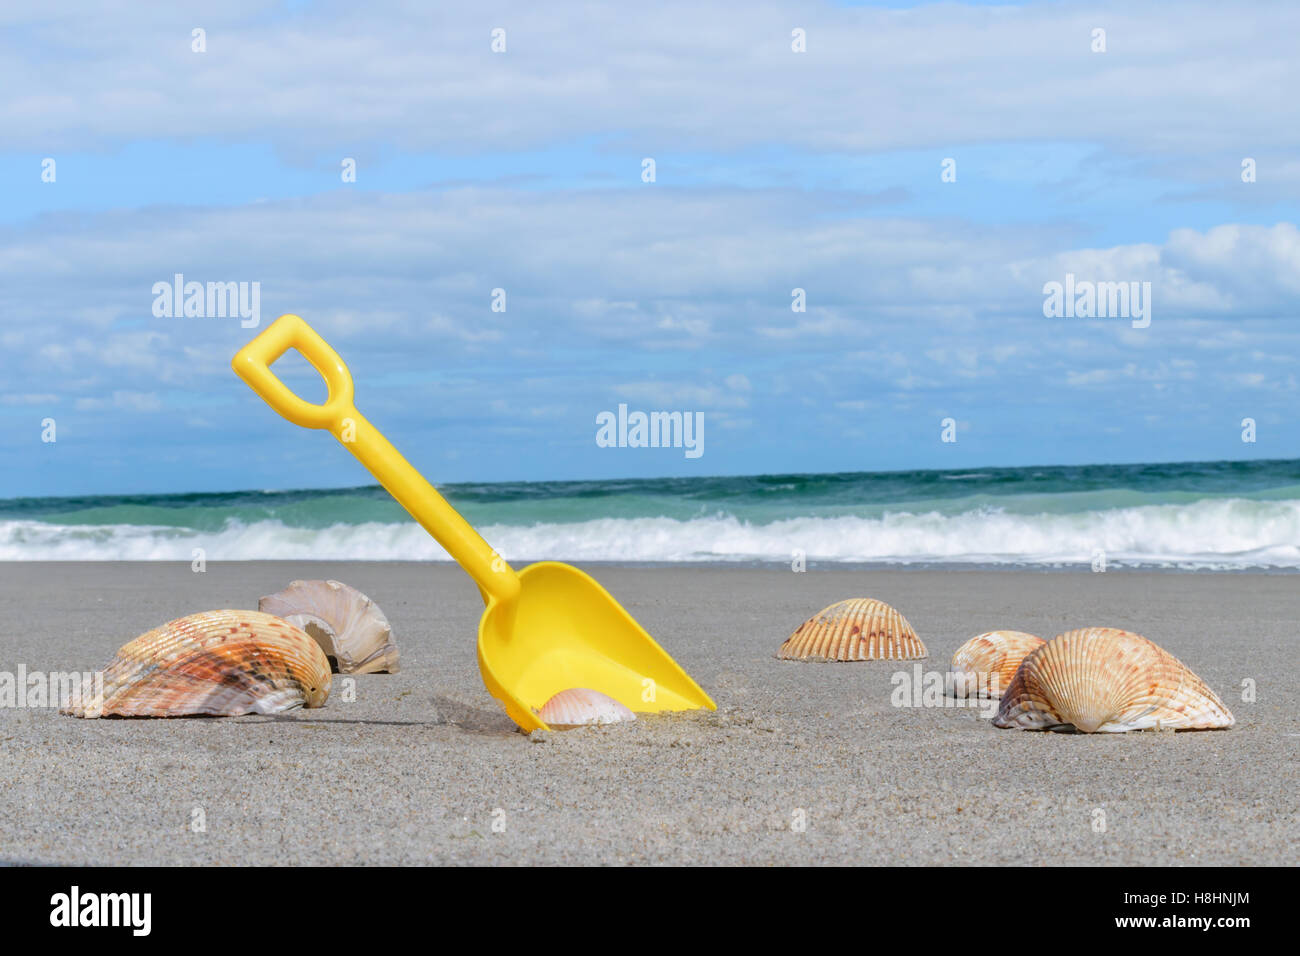 Shells and shovel on a beach with shallow depth of field Stock Photo